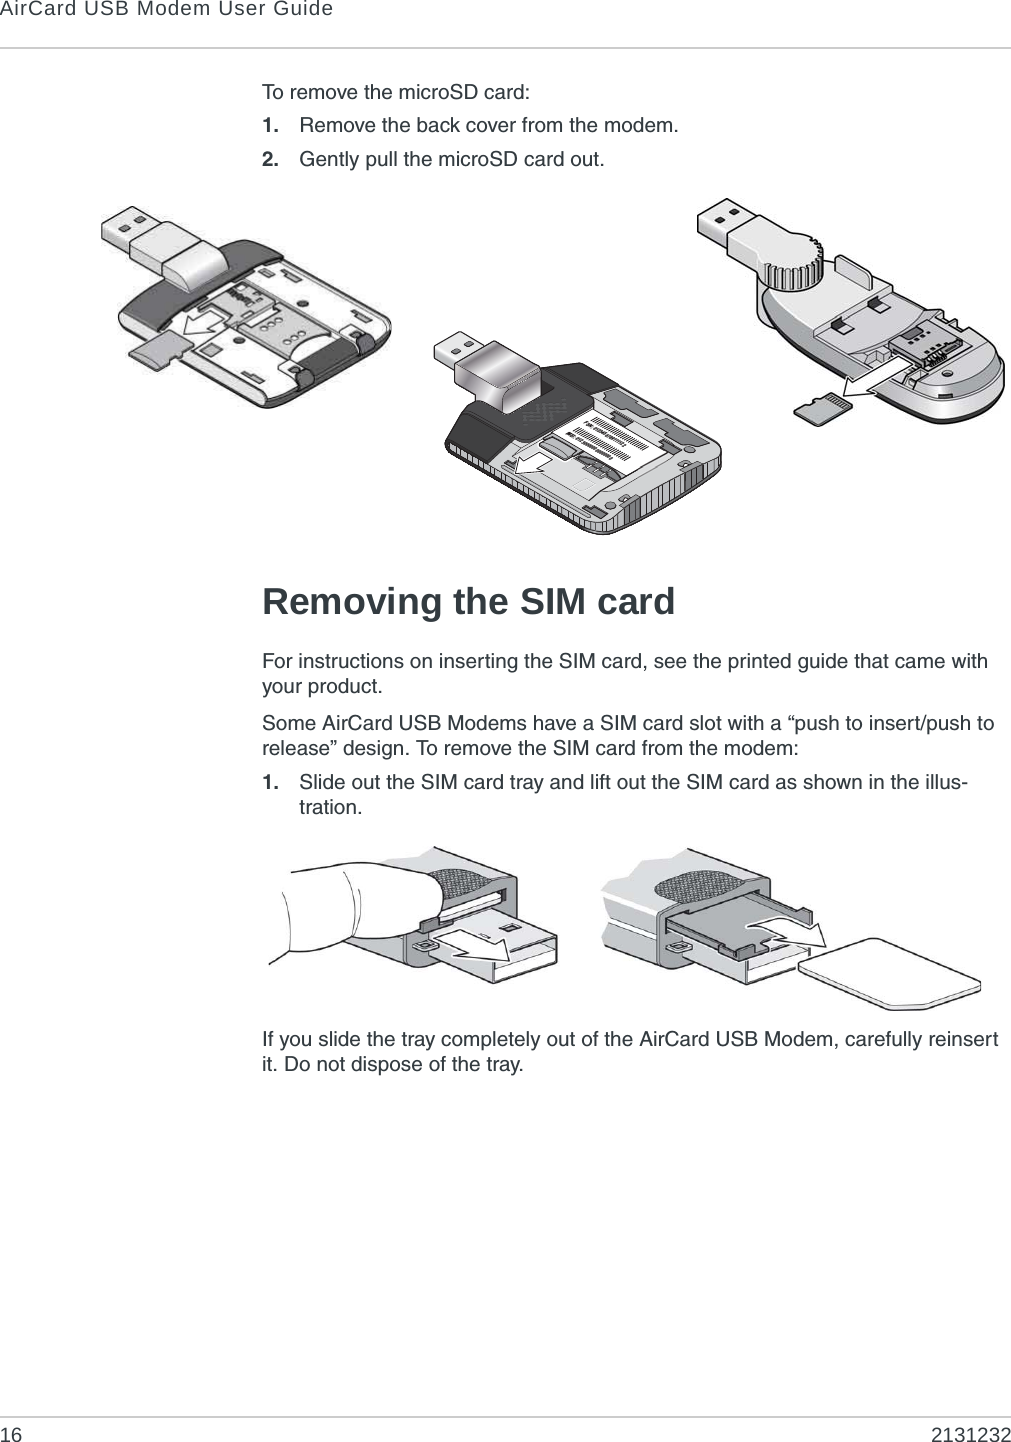 AirCard USB Modem User Guide16 2131232To remove the microSD card:1. Remove the back cover from the modem.2. Gently pull the microSD card out.Removing the SIM cardFor instructions on inserting the SIM card, see the printed guide that came with your product.Some AirCard USB Modems have a SIM card slot with a “push to insert/push to release” design. To remove the SIM card from the modem:1. Slide out the SIM card tray and lift out the SIM card as shown in the illus-tration.If you slide the tray completely out of the AirCard USB Modem, carefully reinsert it. Do not dispose of the tray.FSN: 0123456789111122IMEI: 012300000000000000